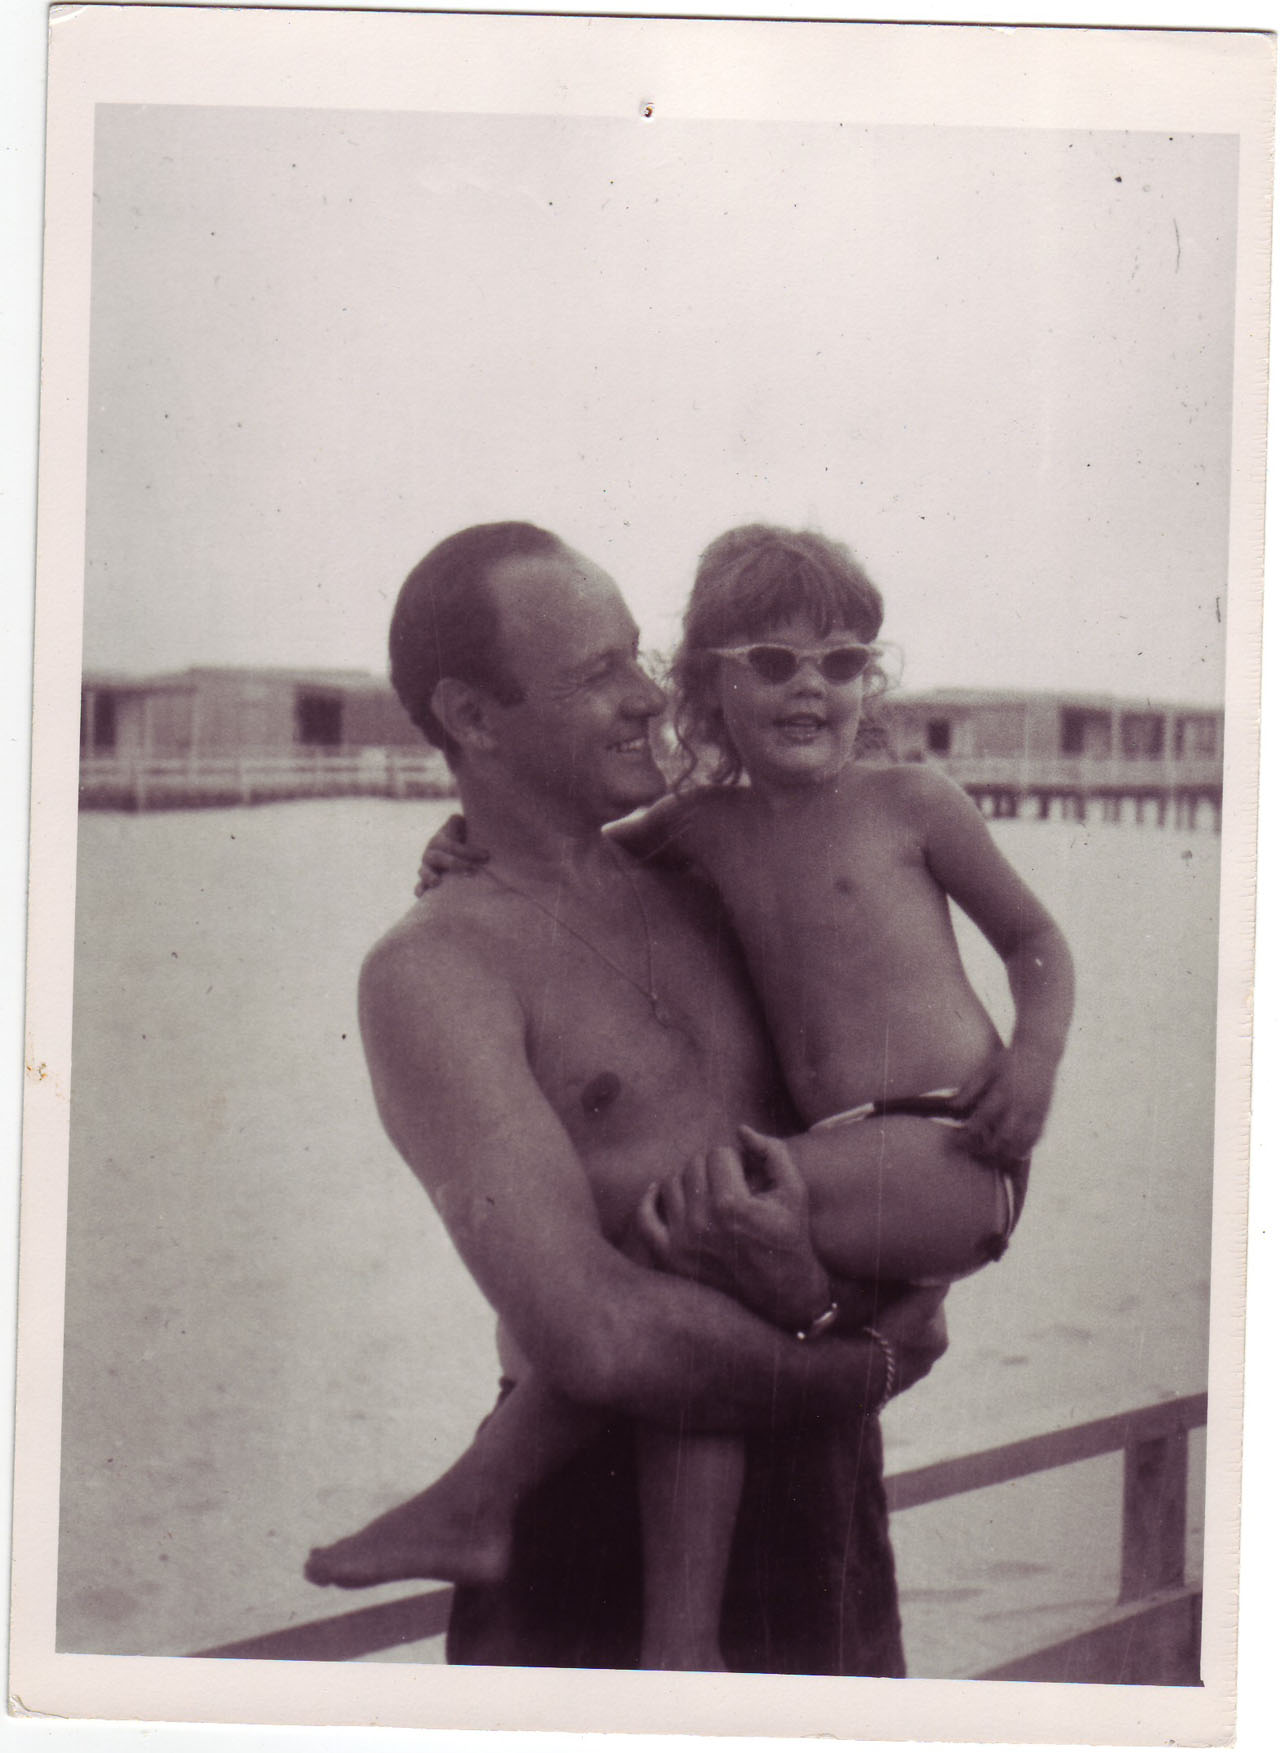 Stan and J.C. Lee at the beach, circa '50s